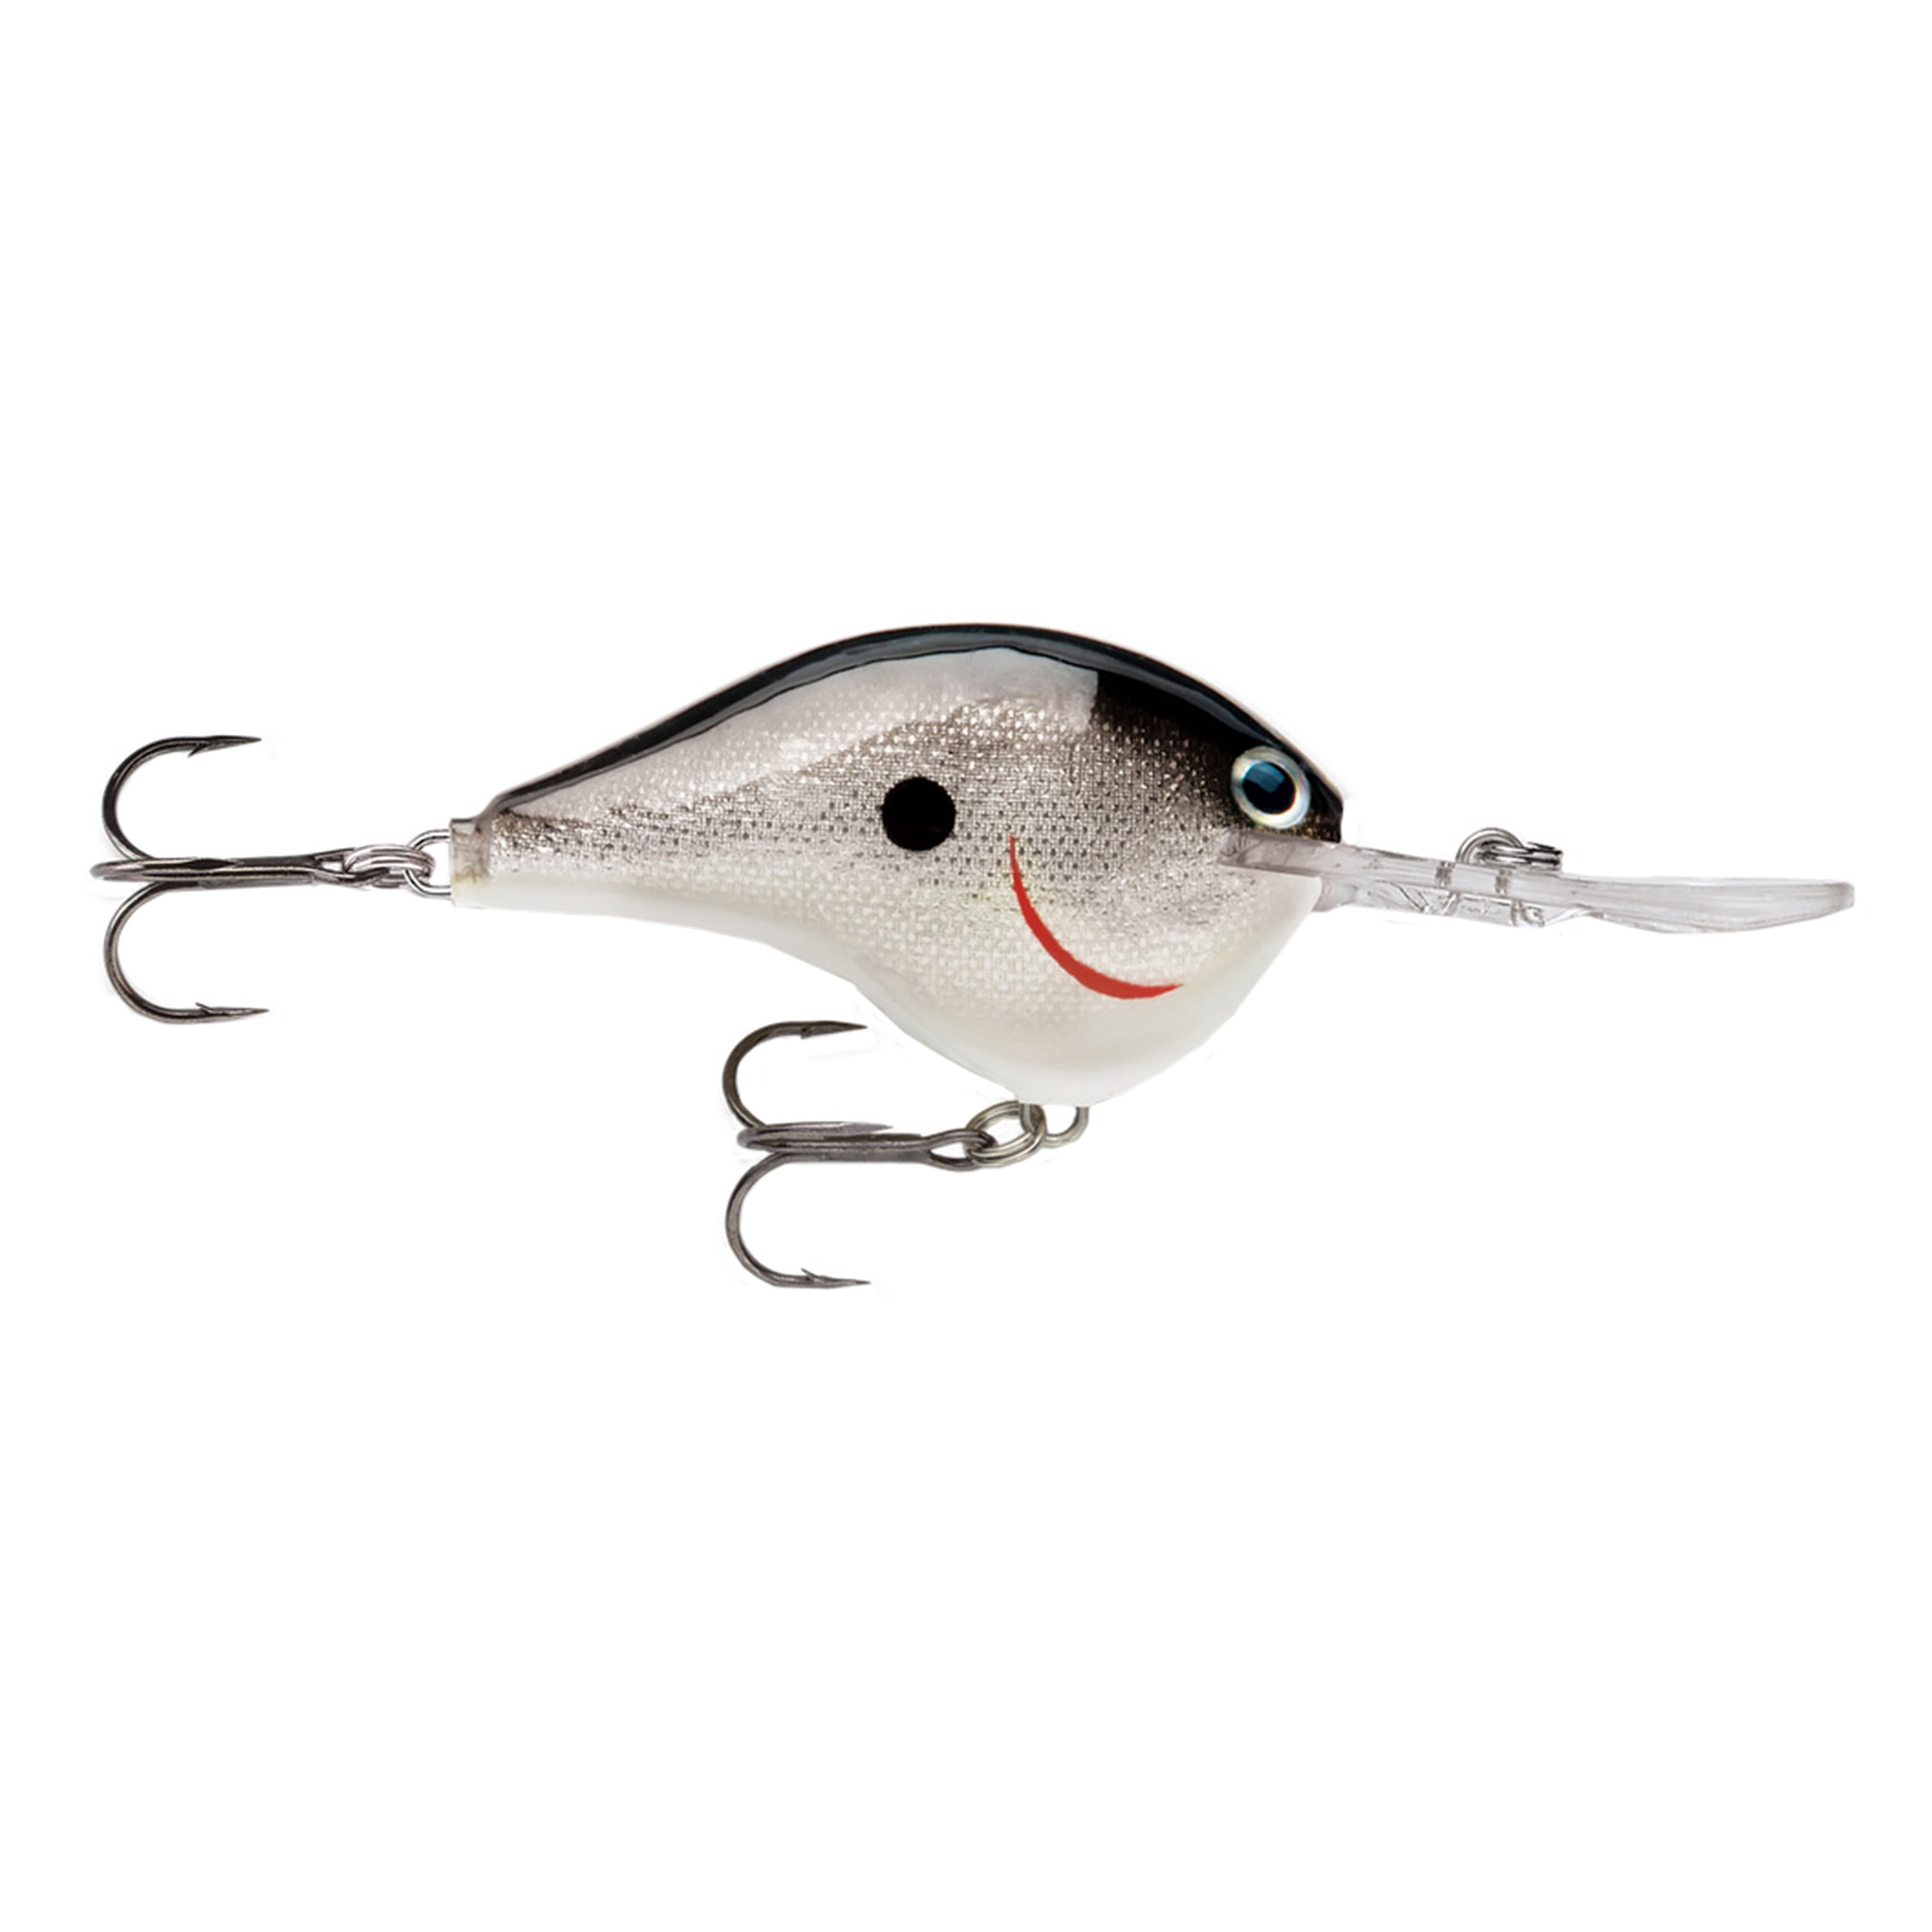 2 1/4 Length Rapala DT10MSY Dives-to Series Custom Ink Lure Mossy per 1 Size 10 6 Depth 2# 4 Treble Hooks 